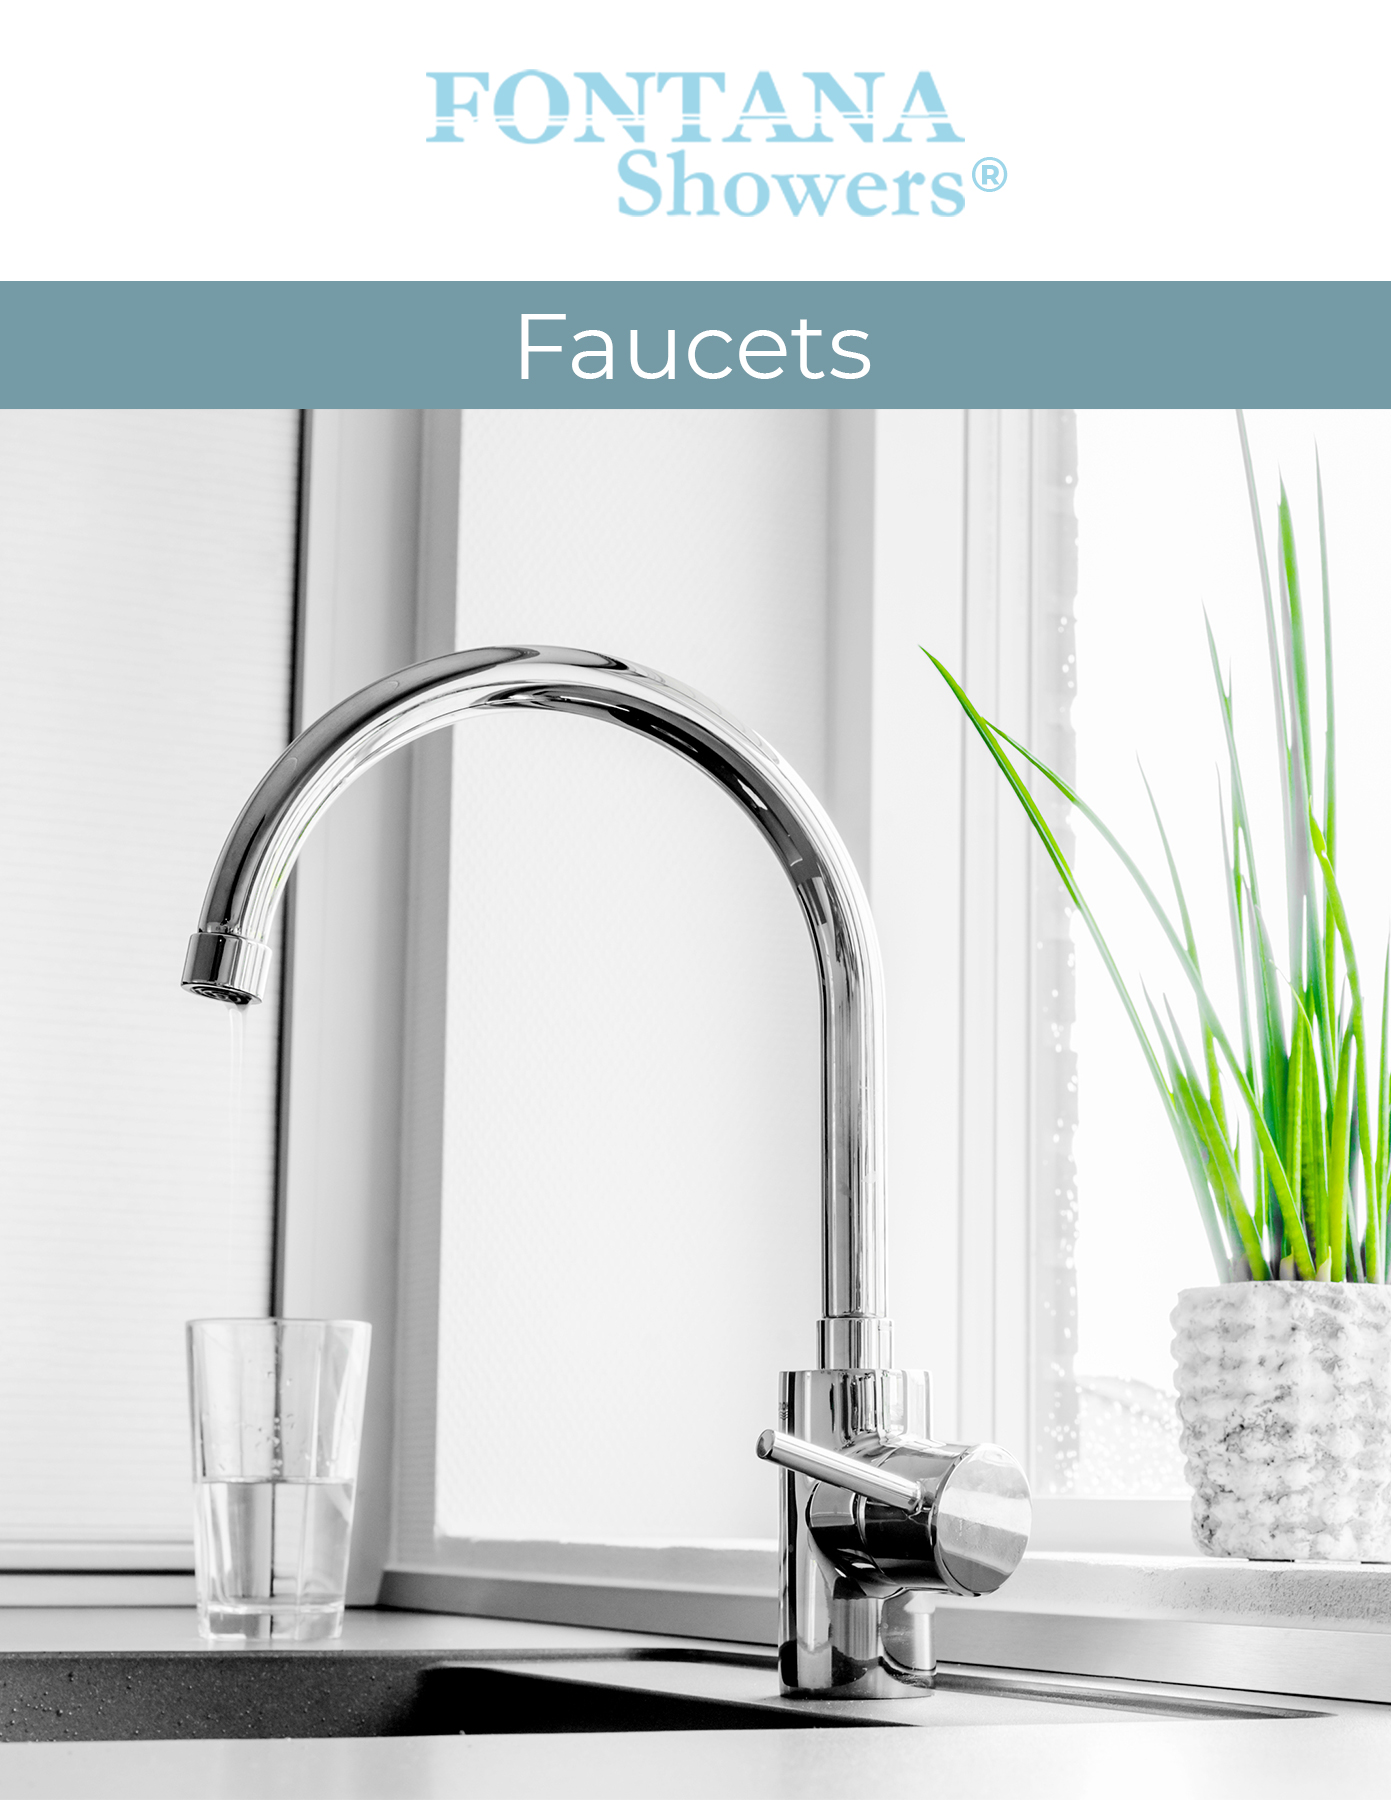 Fontana Showers commercial catalog Faucets